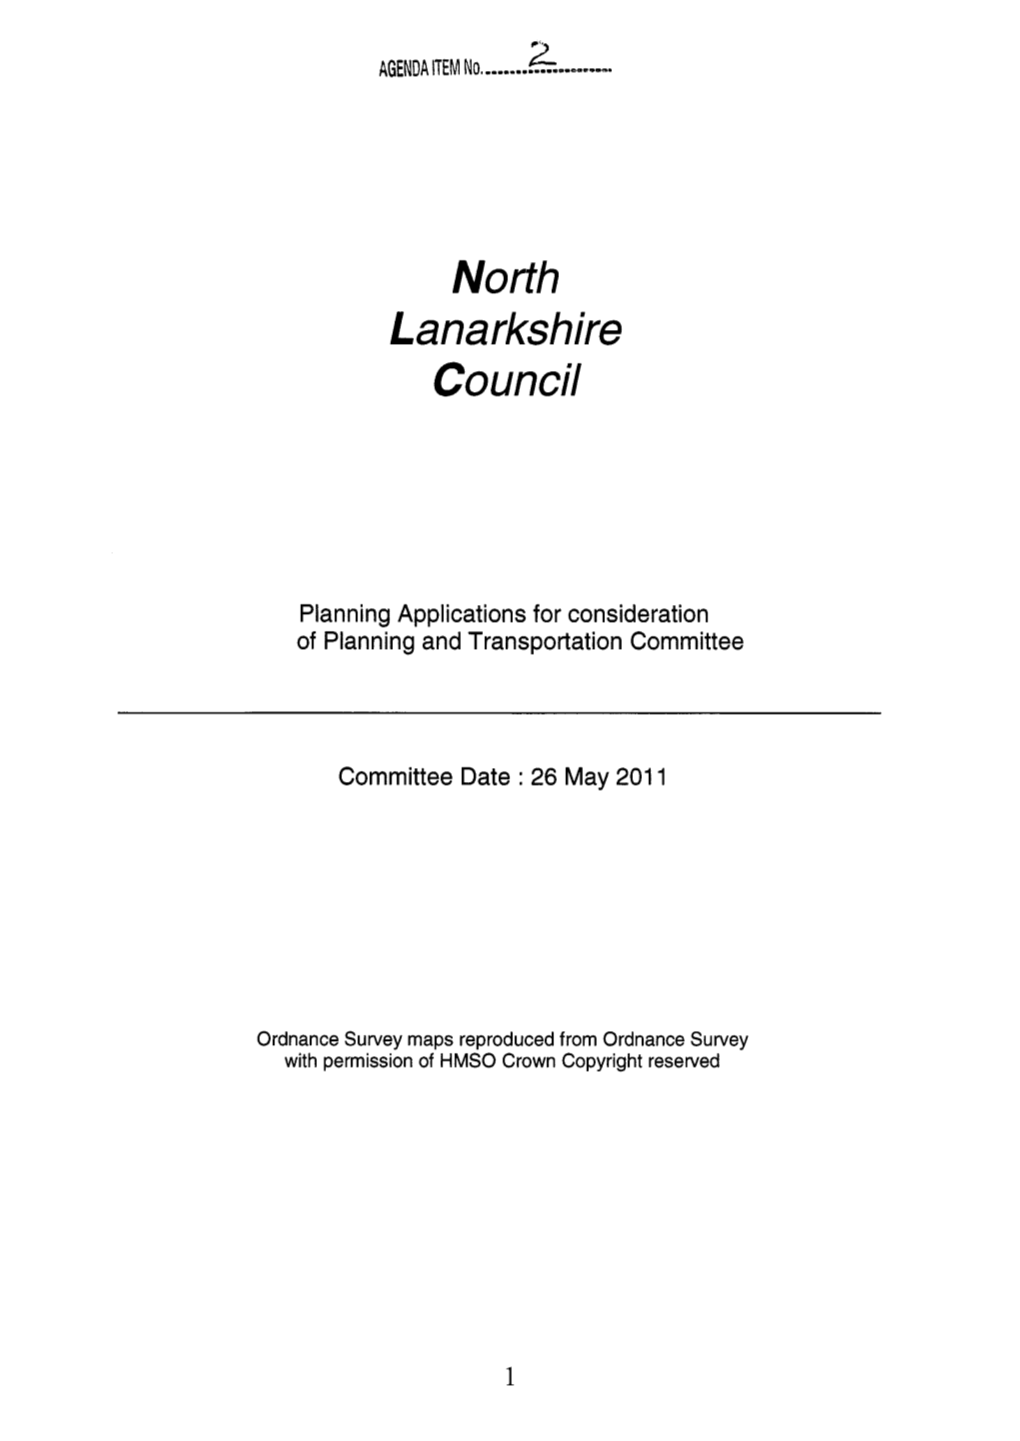 I 2 a (Industrial and Business Sites) in the Finalised Draft North Lanarkshire Local Plan